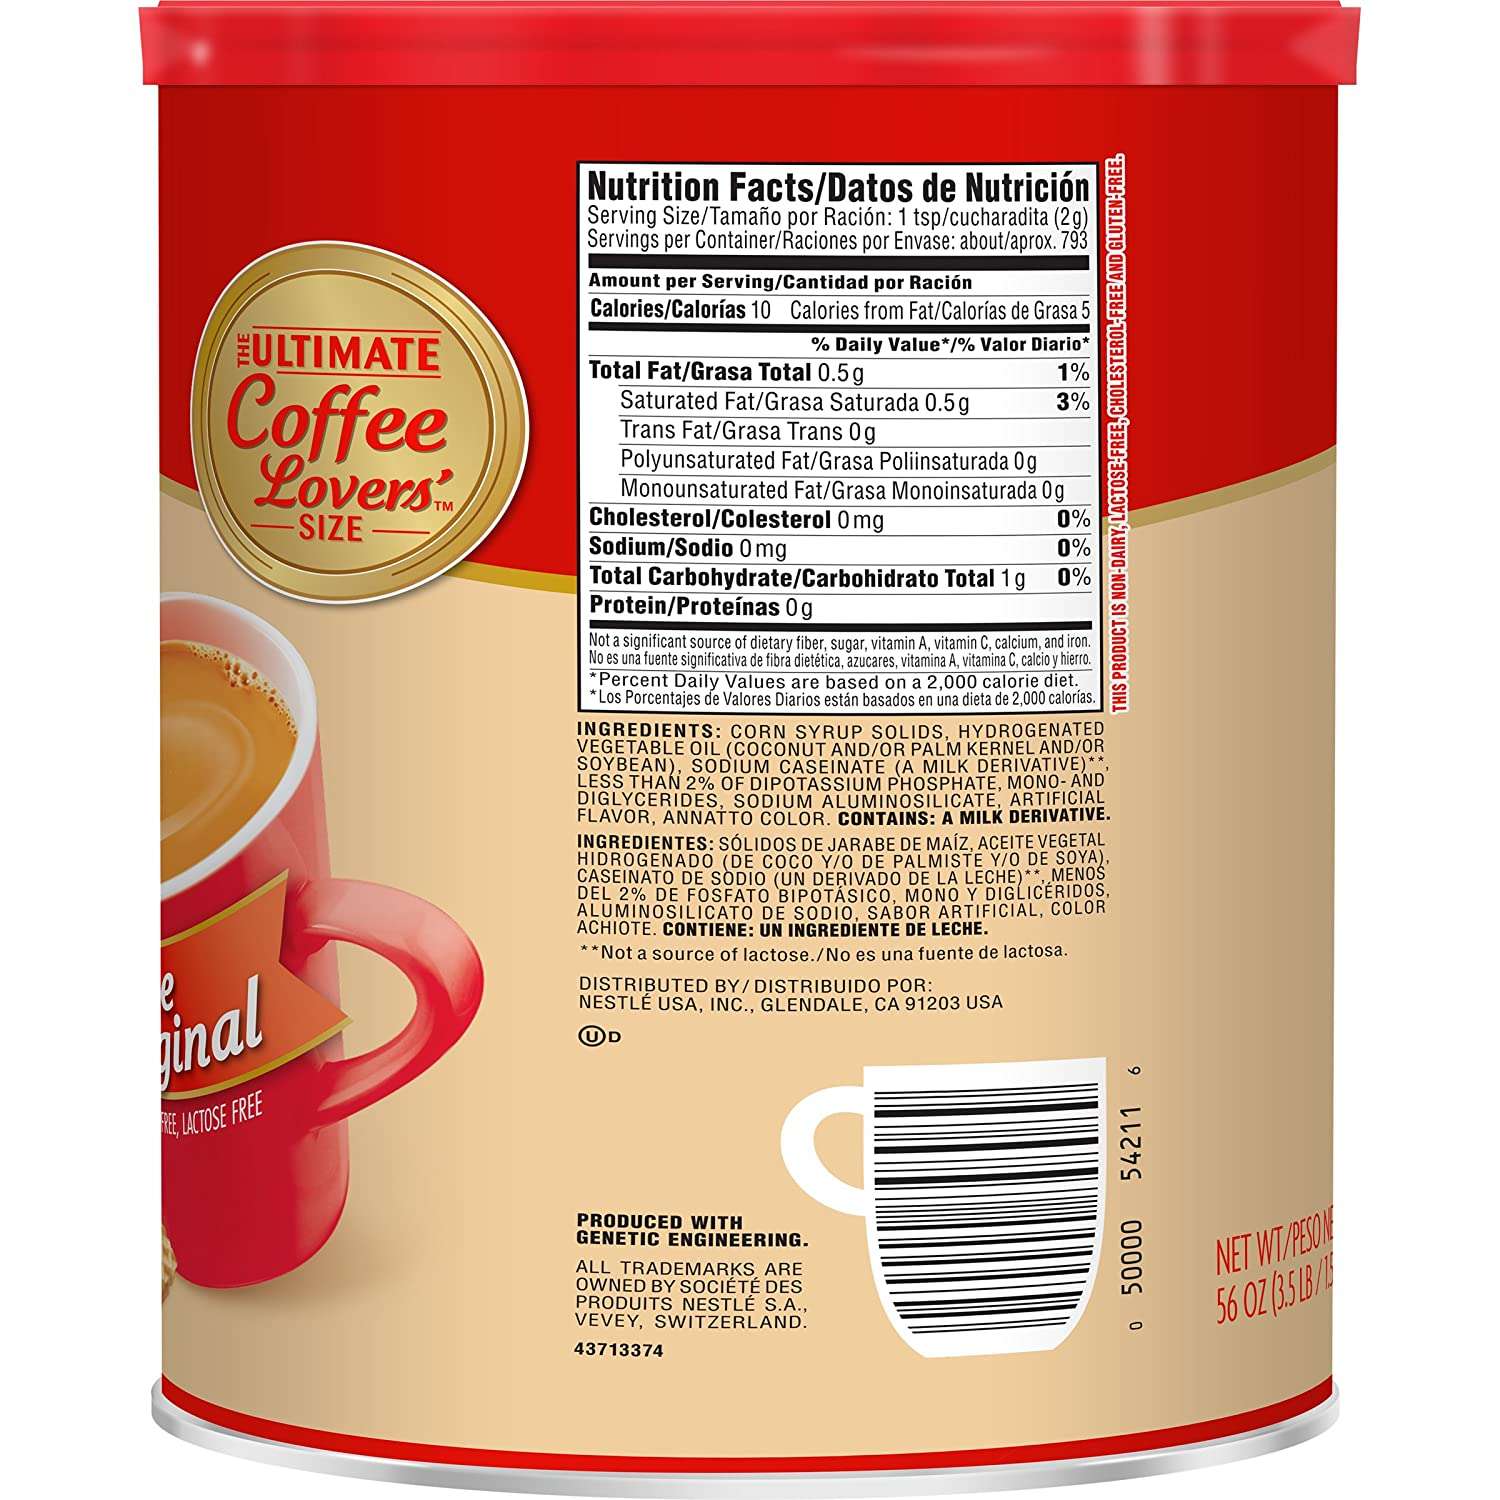 Coffee Mate Powder Creamer Nutrition Facts